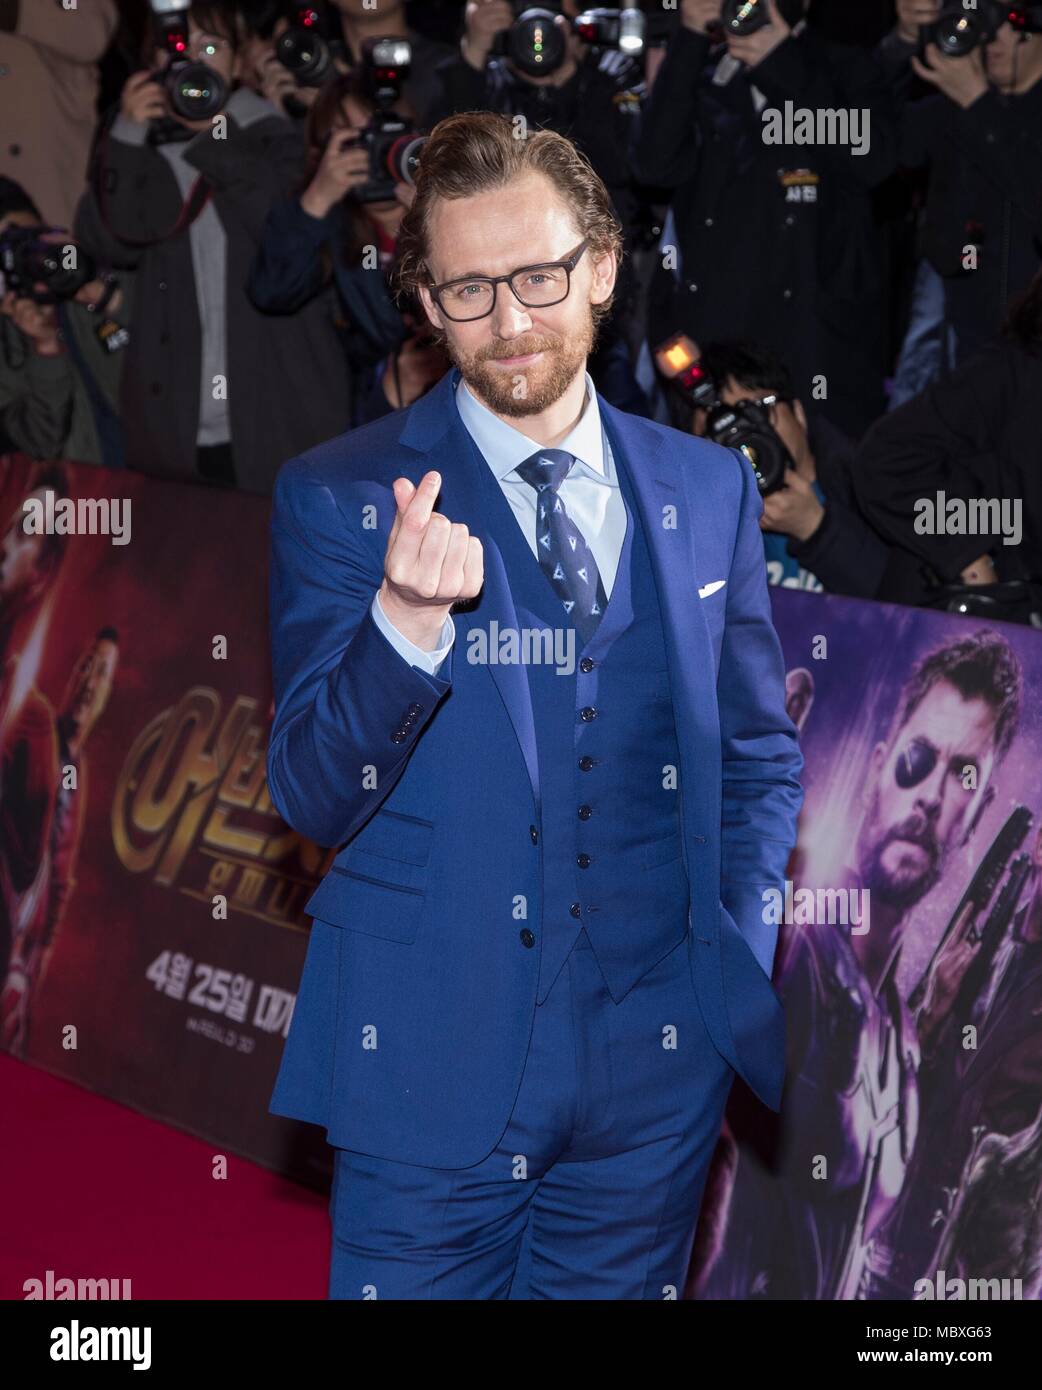 Seoul, South Korea. 12th Apr, 2018. Tom Hiddleston crosses his fingers to form a heart shape to fans during a promotion event of 'Avengers: Infinity War' in Seoul, South Korea, April 12, 2018. Credit: Lee Sang-ho/Xinhua/Alamy Live News Stock Photo